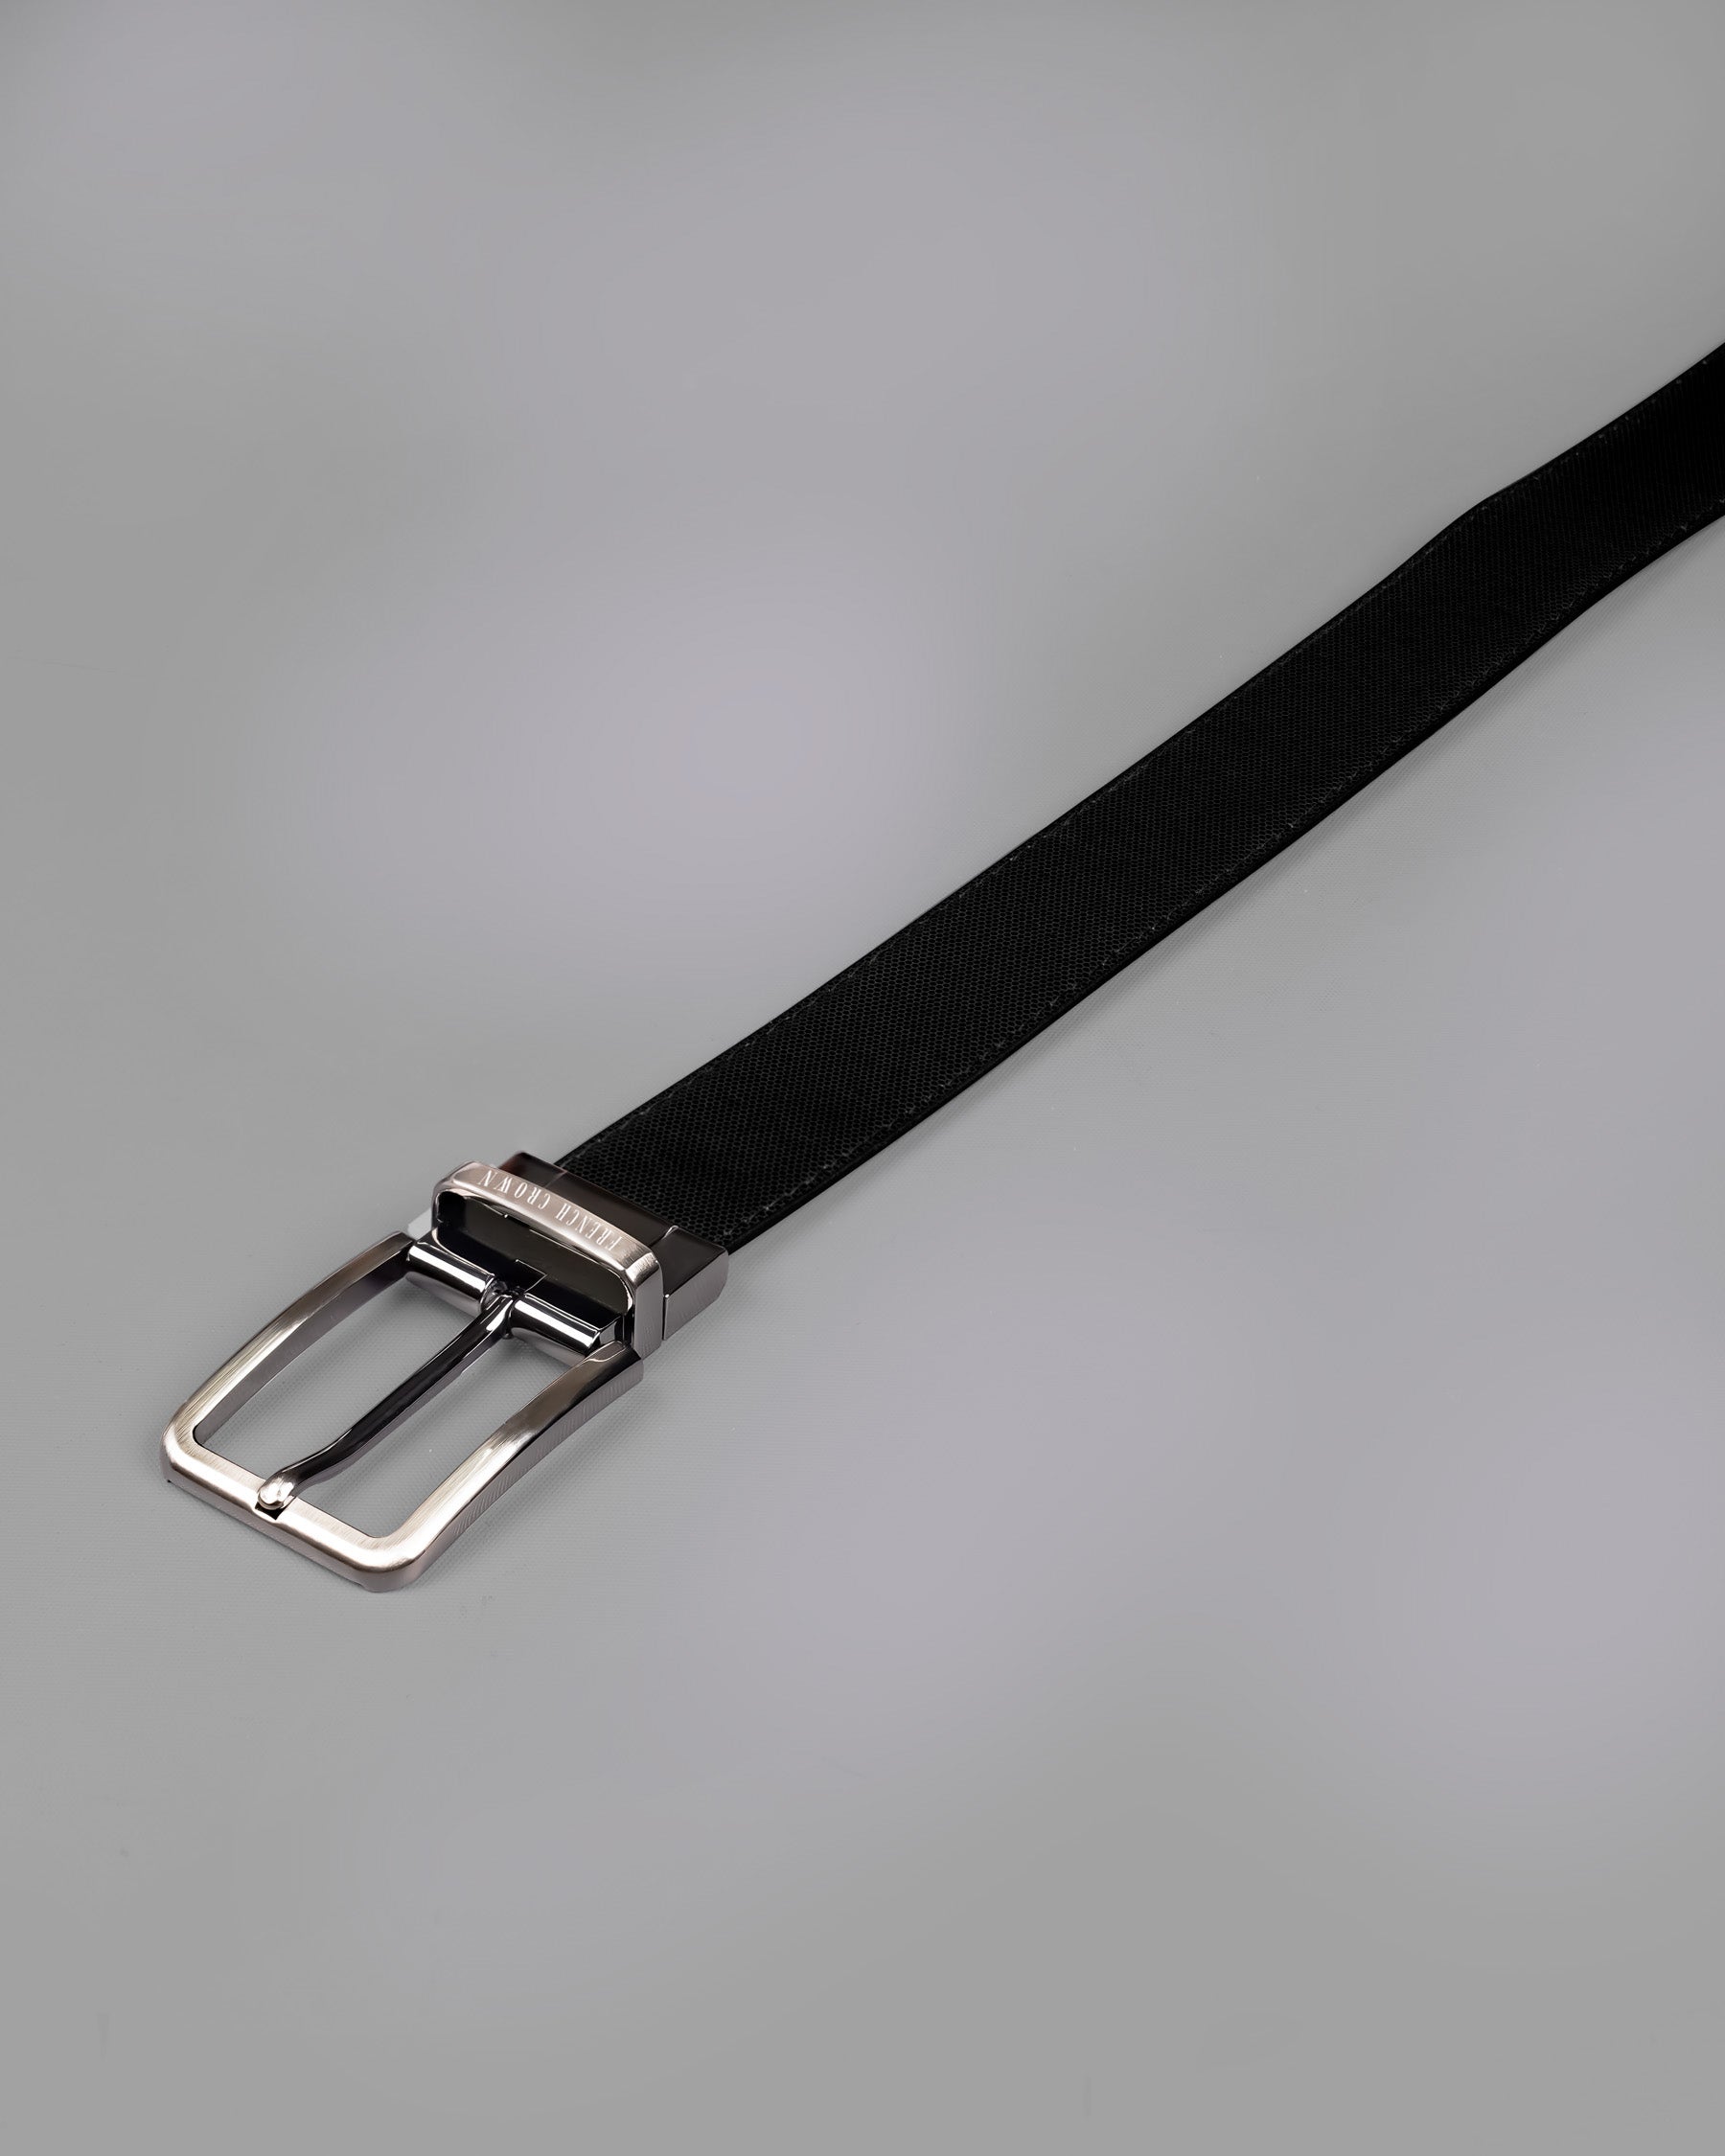 Silver Metallic Shiny Buckle with Jade Black and Brown Leather Free Handcrafted Reversible Belt